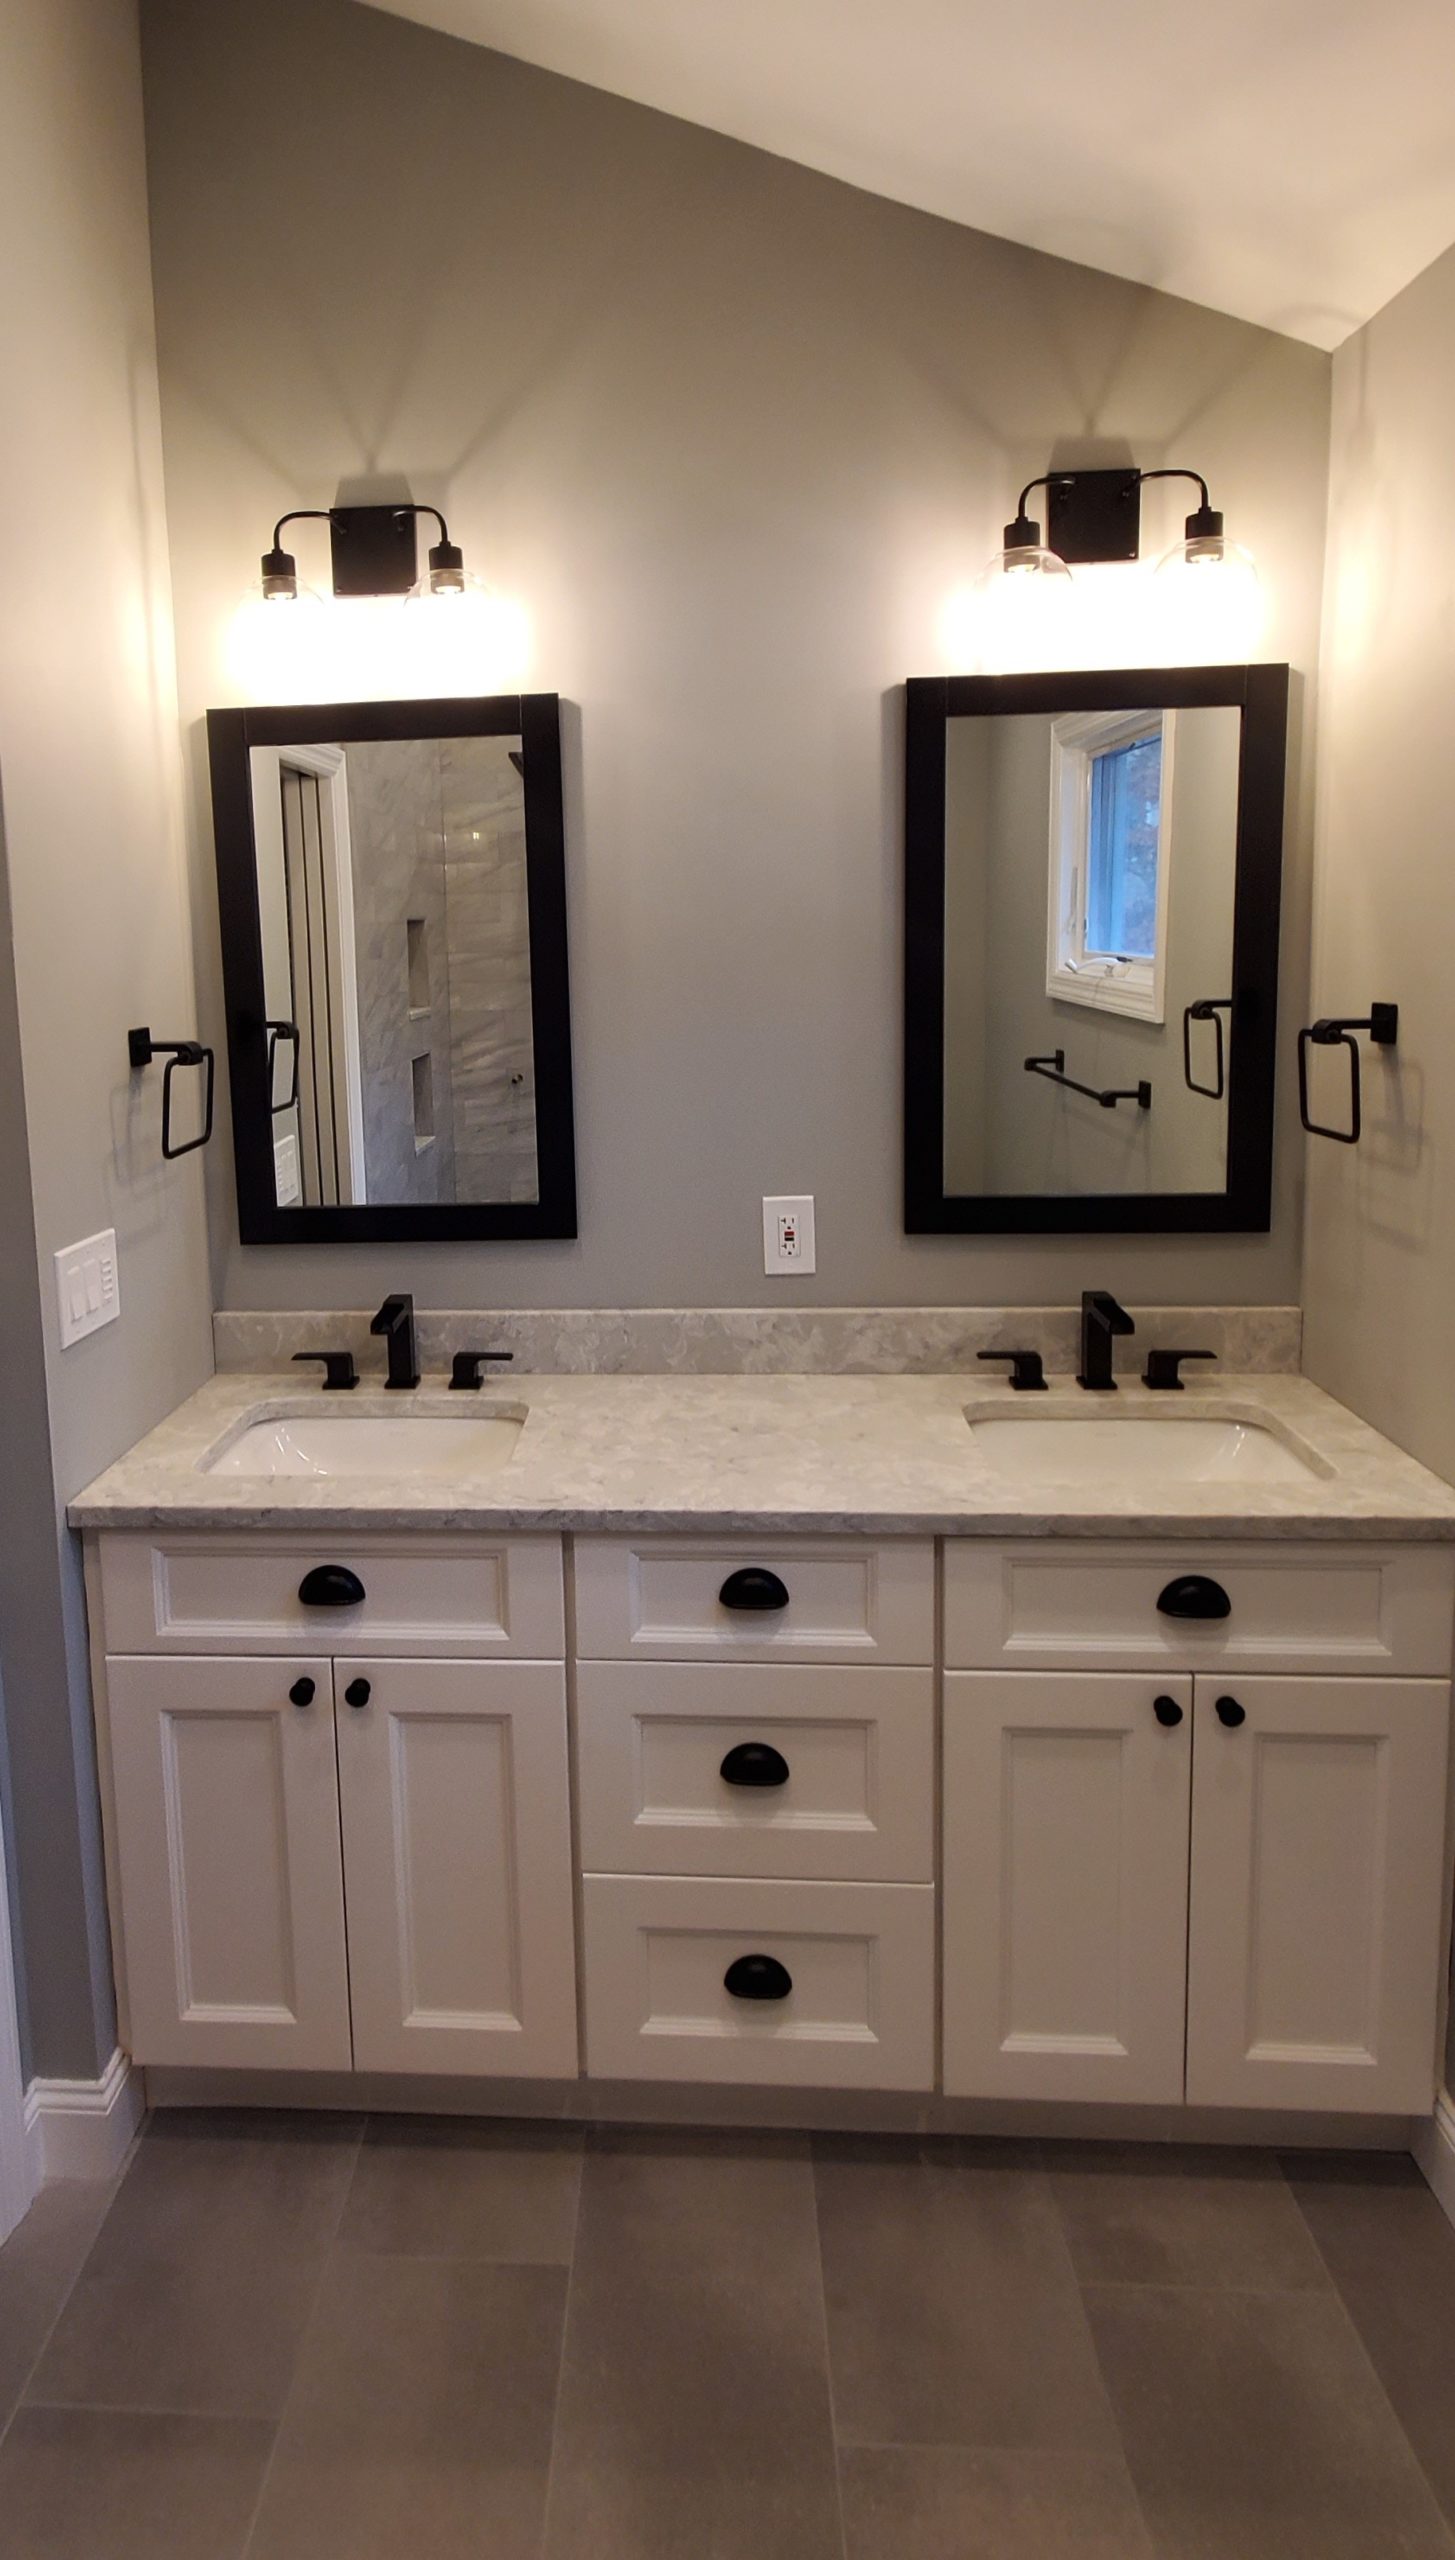 Triple R Services, LLC – Professional plumbing and renovation services